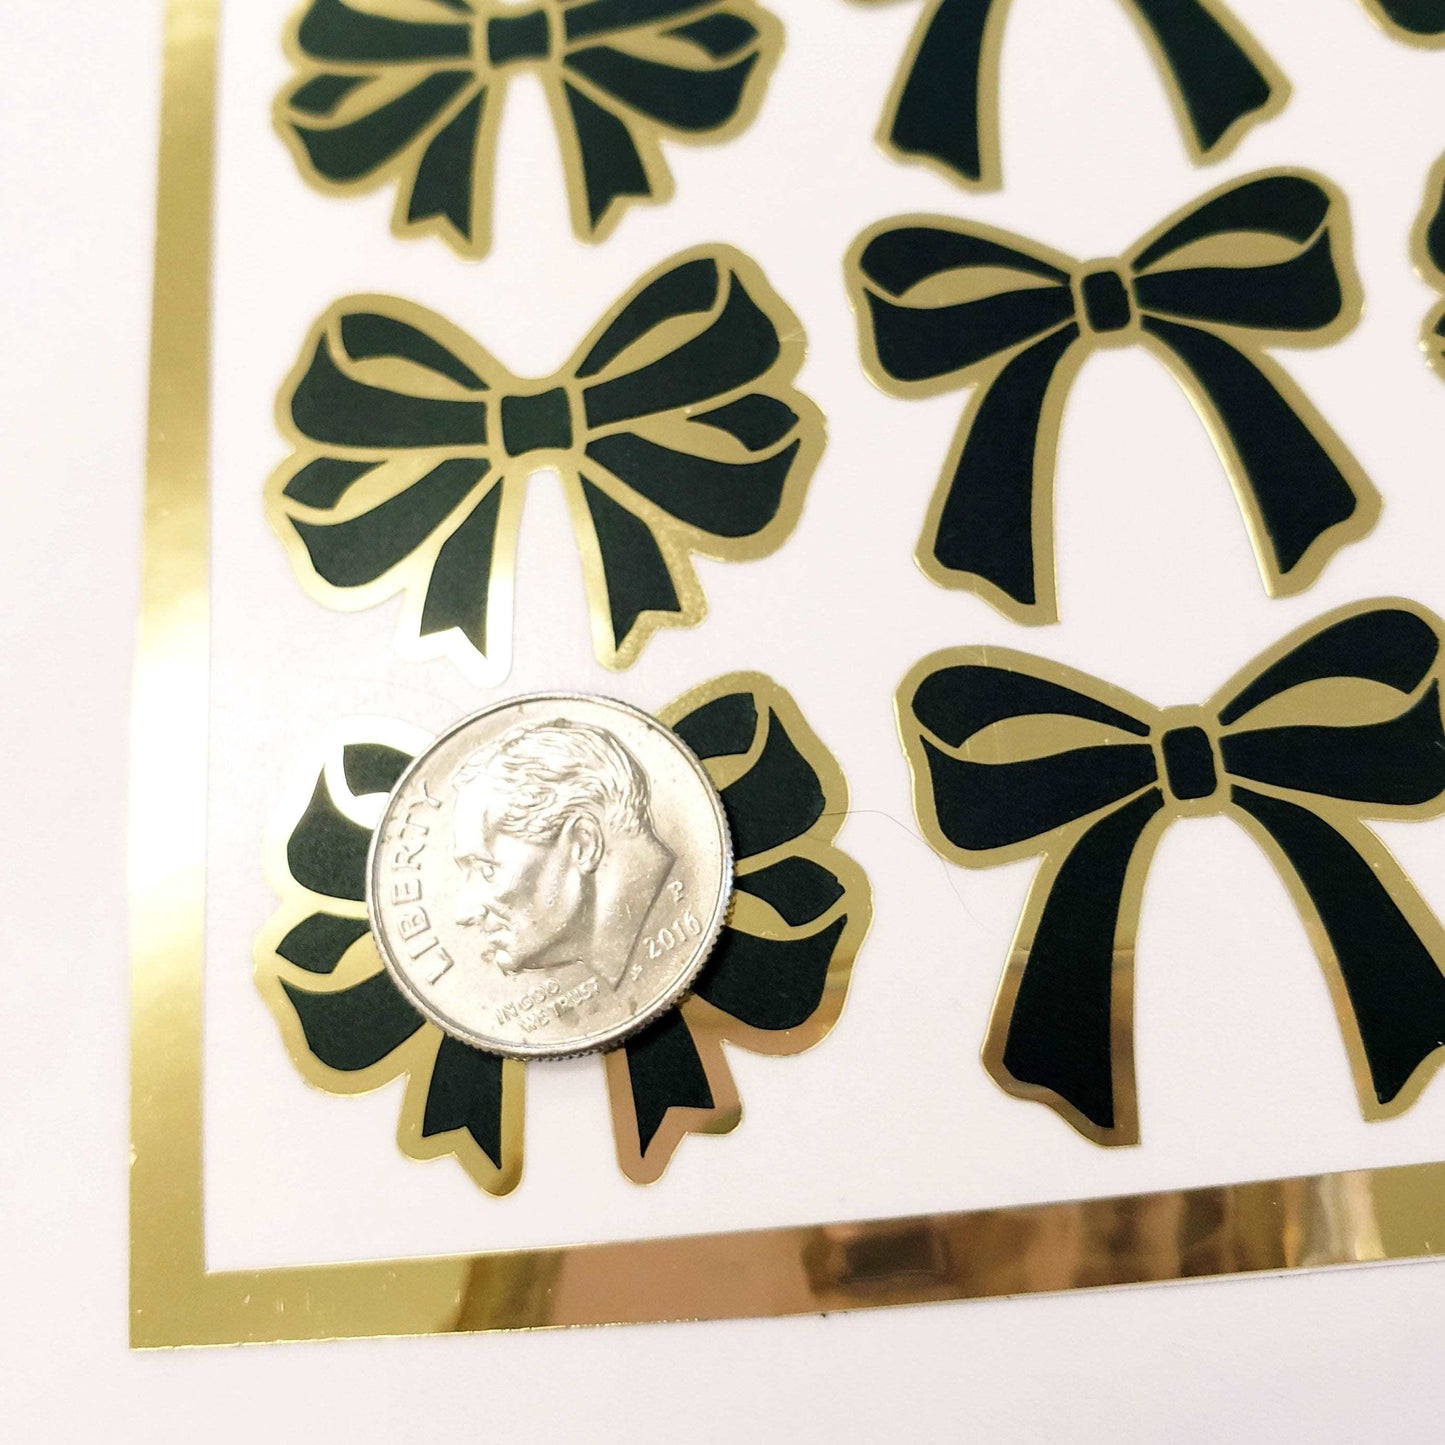 Bow Stickers, set of 28 black and gold ribbon shaped decals, coquette aesthetic, peel and stick bows for cards, invitations and envelopes.